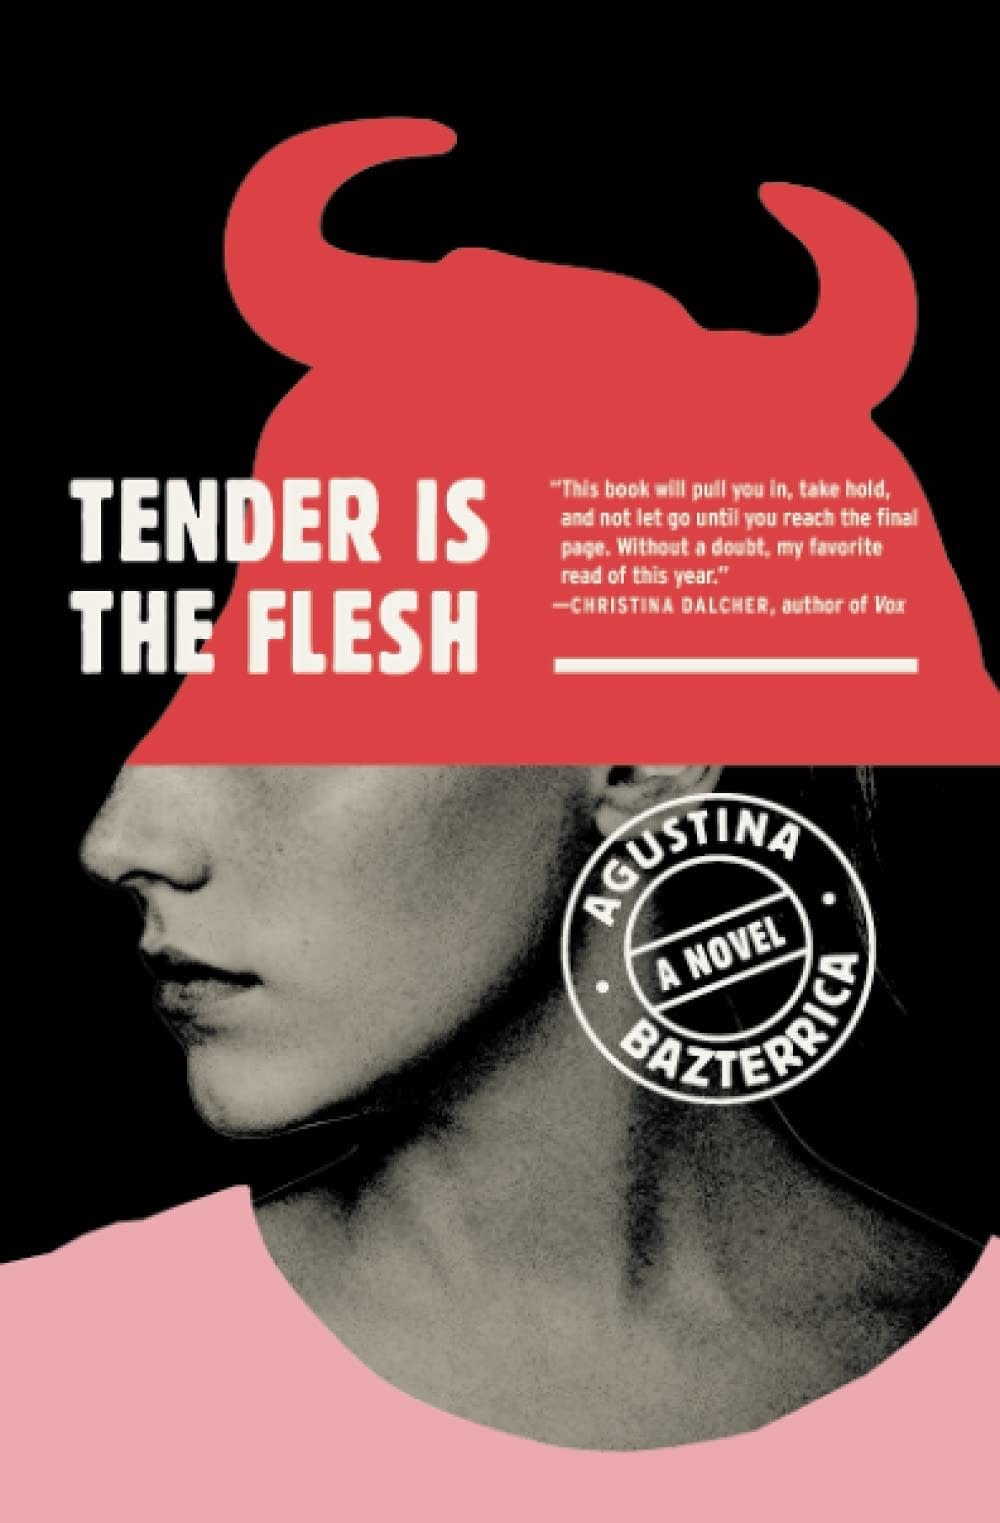 Book cover of "tender is the flesh"